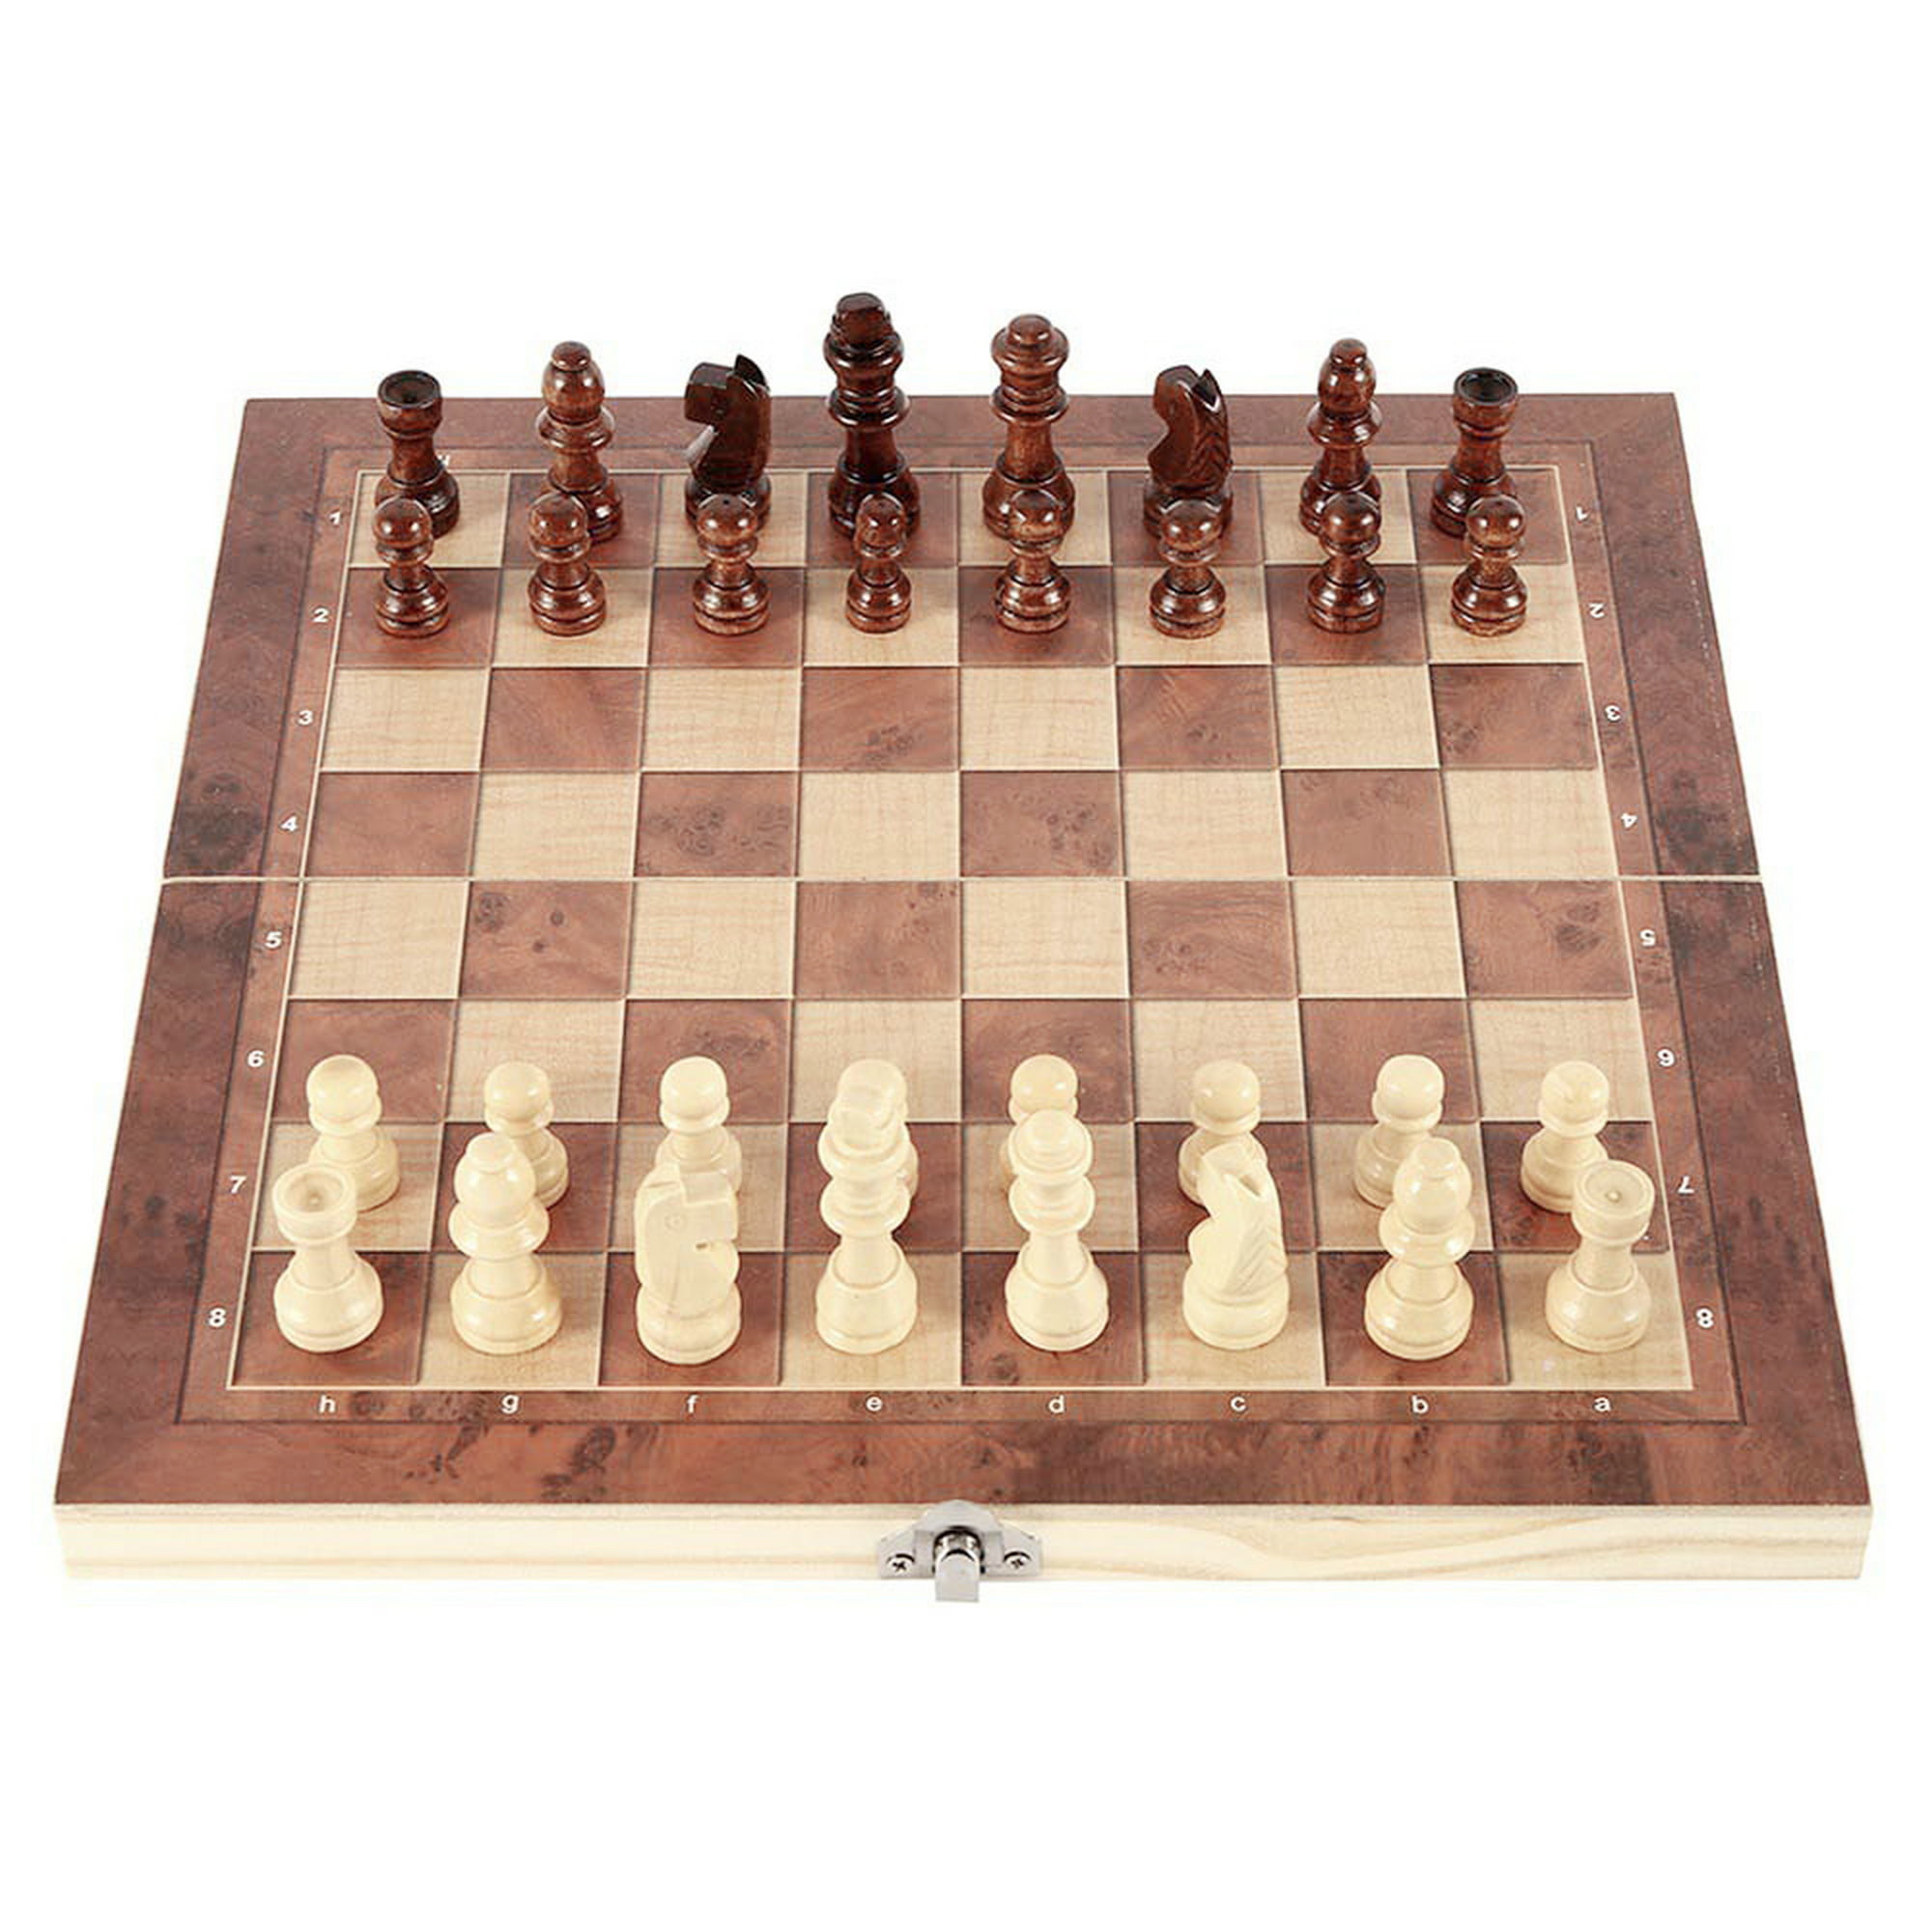 Details about   Large FOLDING WOODEN CHESS SET Board Game Checkers Backgammon Draughts Toys Gift 